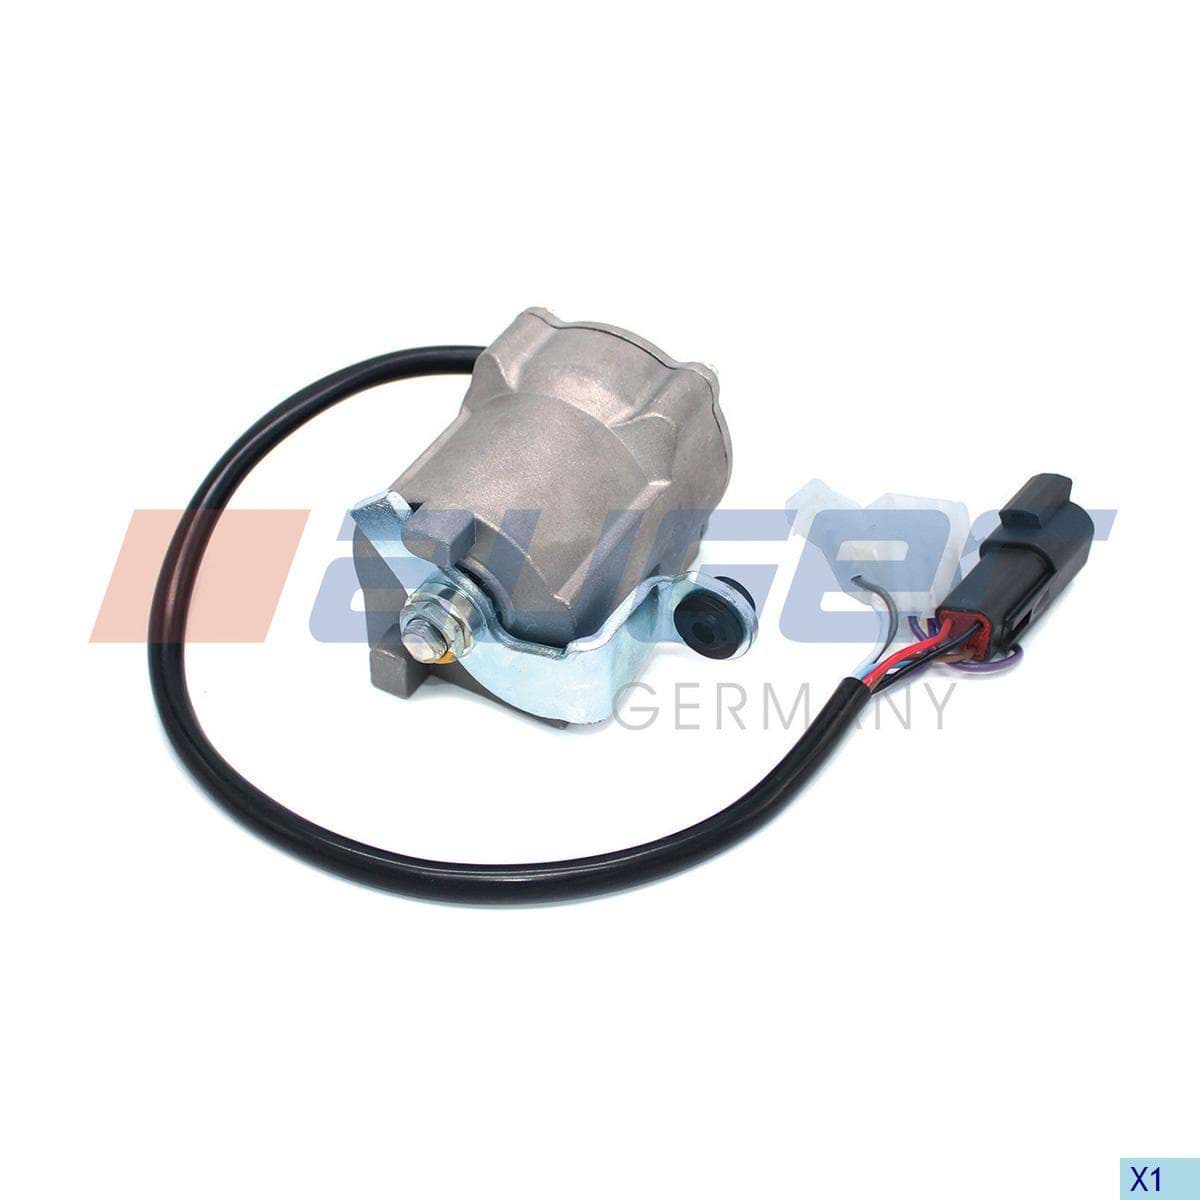 Picture of 87062 Auger Sensor Gaspedal passend für SCANIA